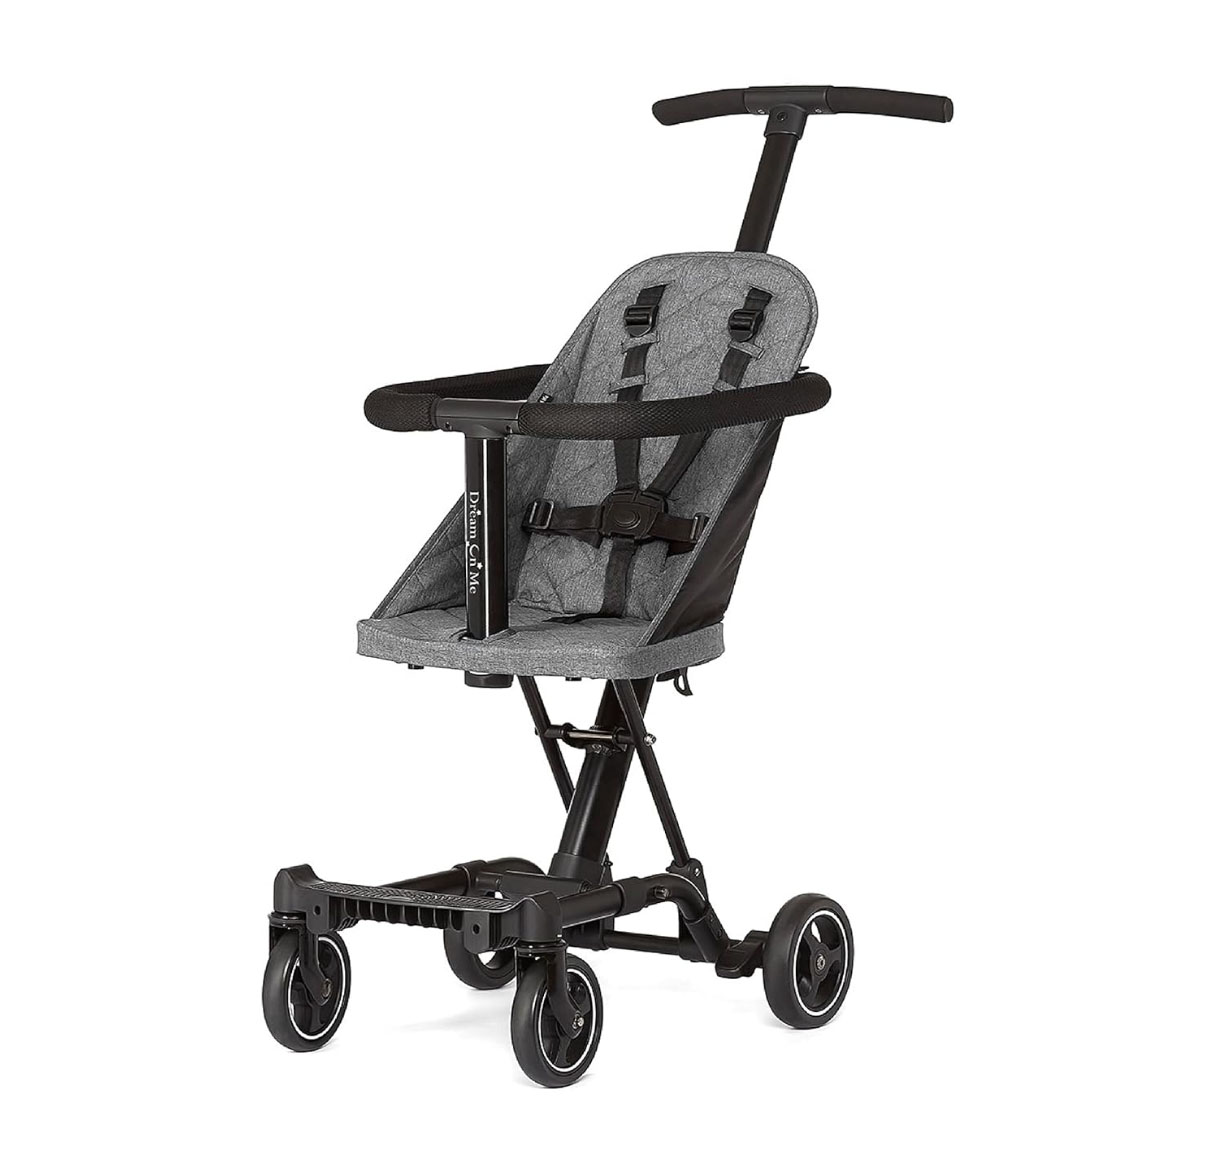 Grey compact stroller without canopy